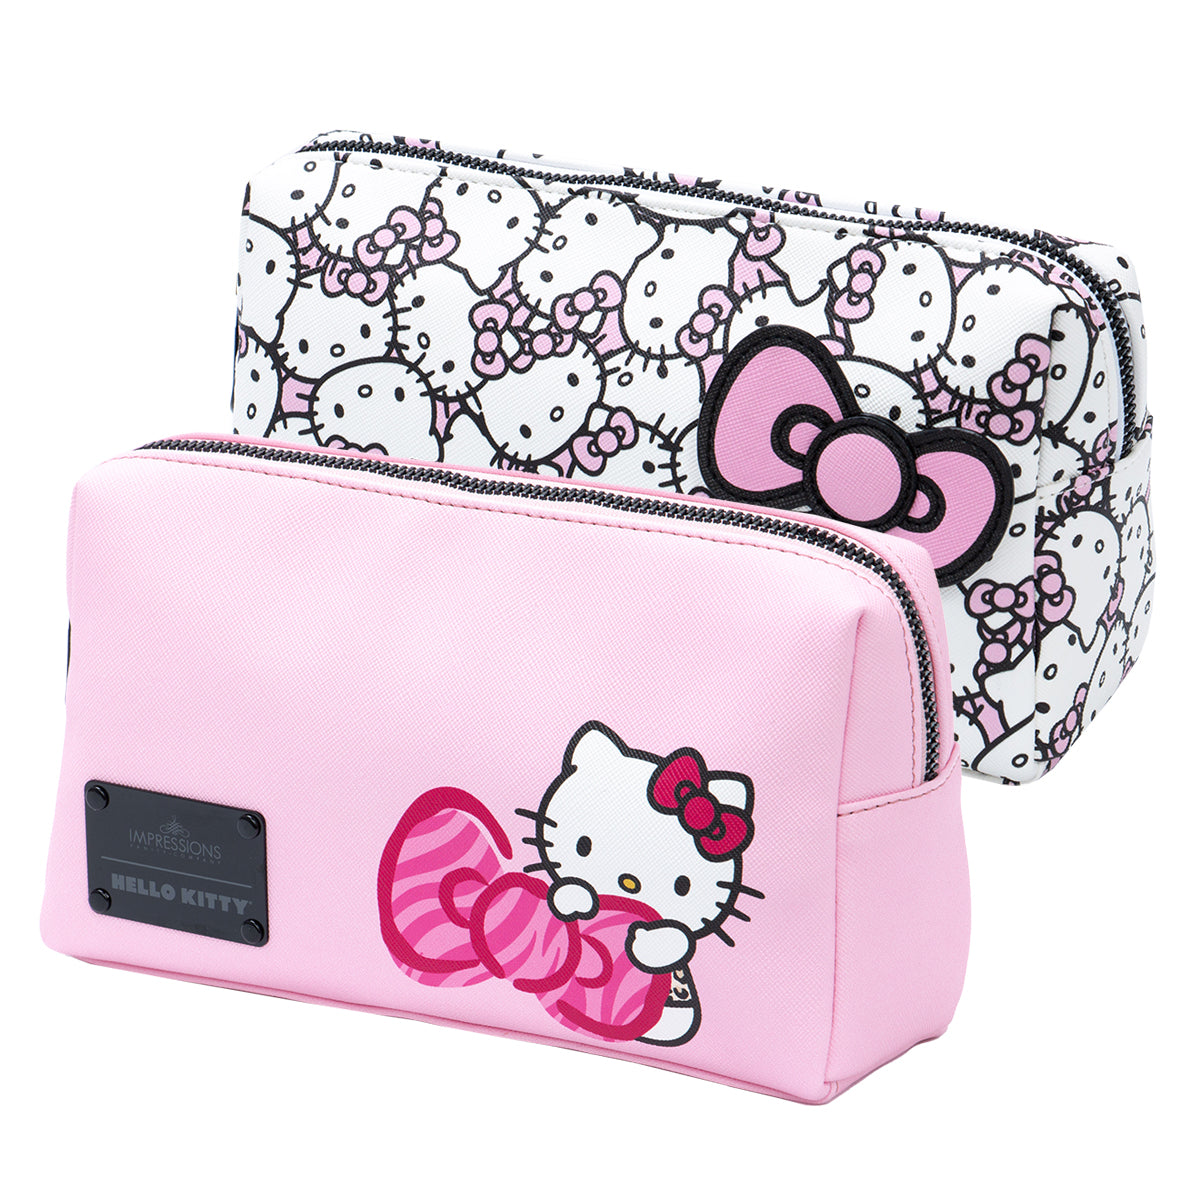 Hello Kitty x Impressions Vanity Cosmetic Pouch (Pink) Beauty Impressions Vanity   